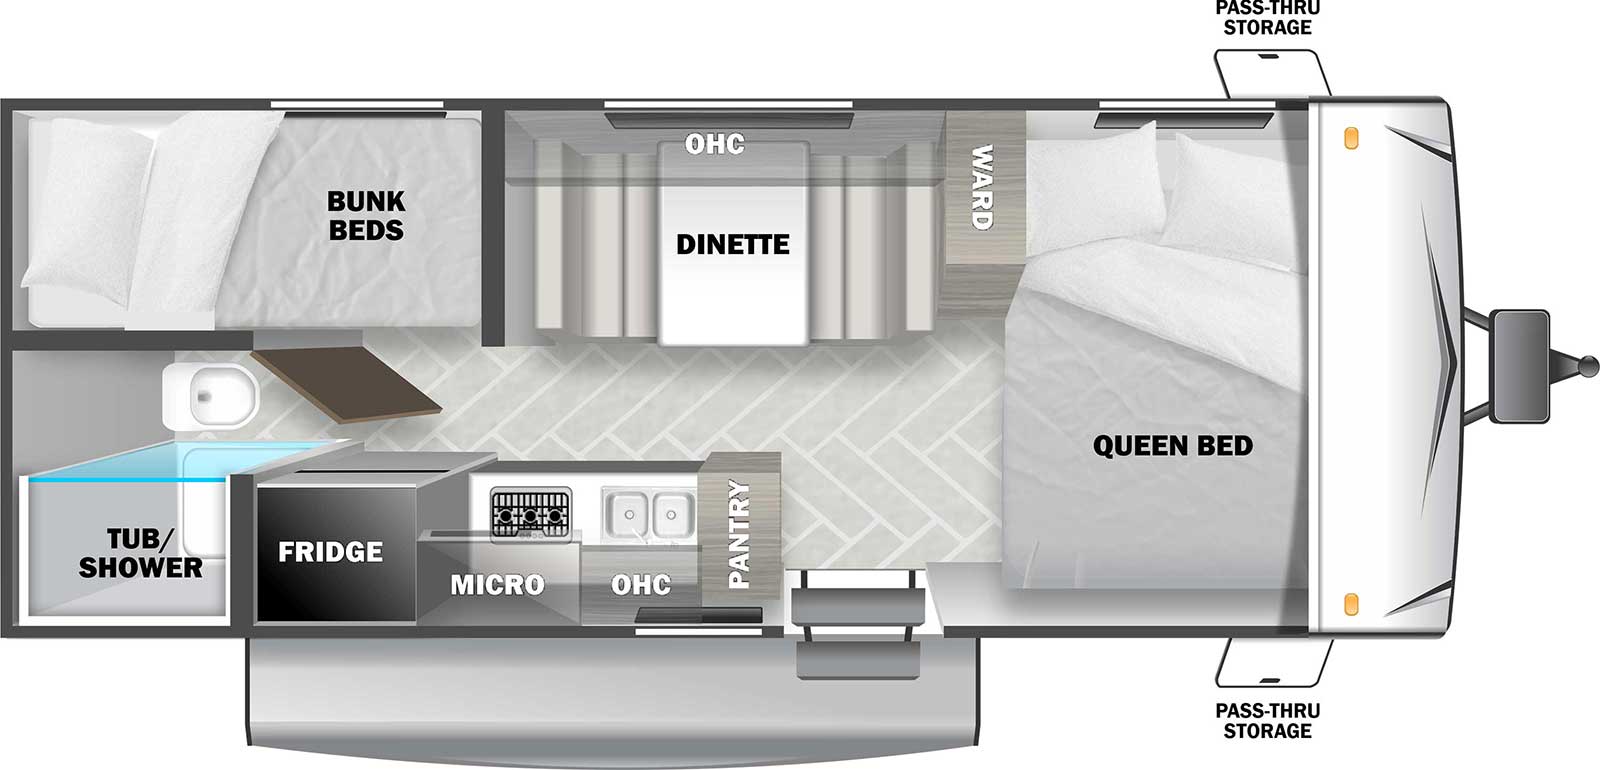 The EVO 177BQ has one entry door near the front of the unit, pass-through storage, and a 14' awning on the outside. When you enter the camper, there is an RV queen bed immediately to your right and taking up the space in front. The bed is oriented horizontally, perpendicular to the length of the trailer, with a wardrobe cabinet on the left side. To the left of the door, on the near wall, is the kitchen area with a panty, sink, stovetop, and refrigerator, with overhead cabinets and an overhead microwave. To the left of that, and taking up half the rear area, is the bathroom containing a commode and tub/shower. Directly across from the bathroom and taking up the other half of the rear space, is a set of double bunks. To the right of the bunks is a booth dinette with overhead cabinets above. 